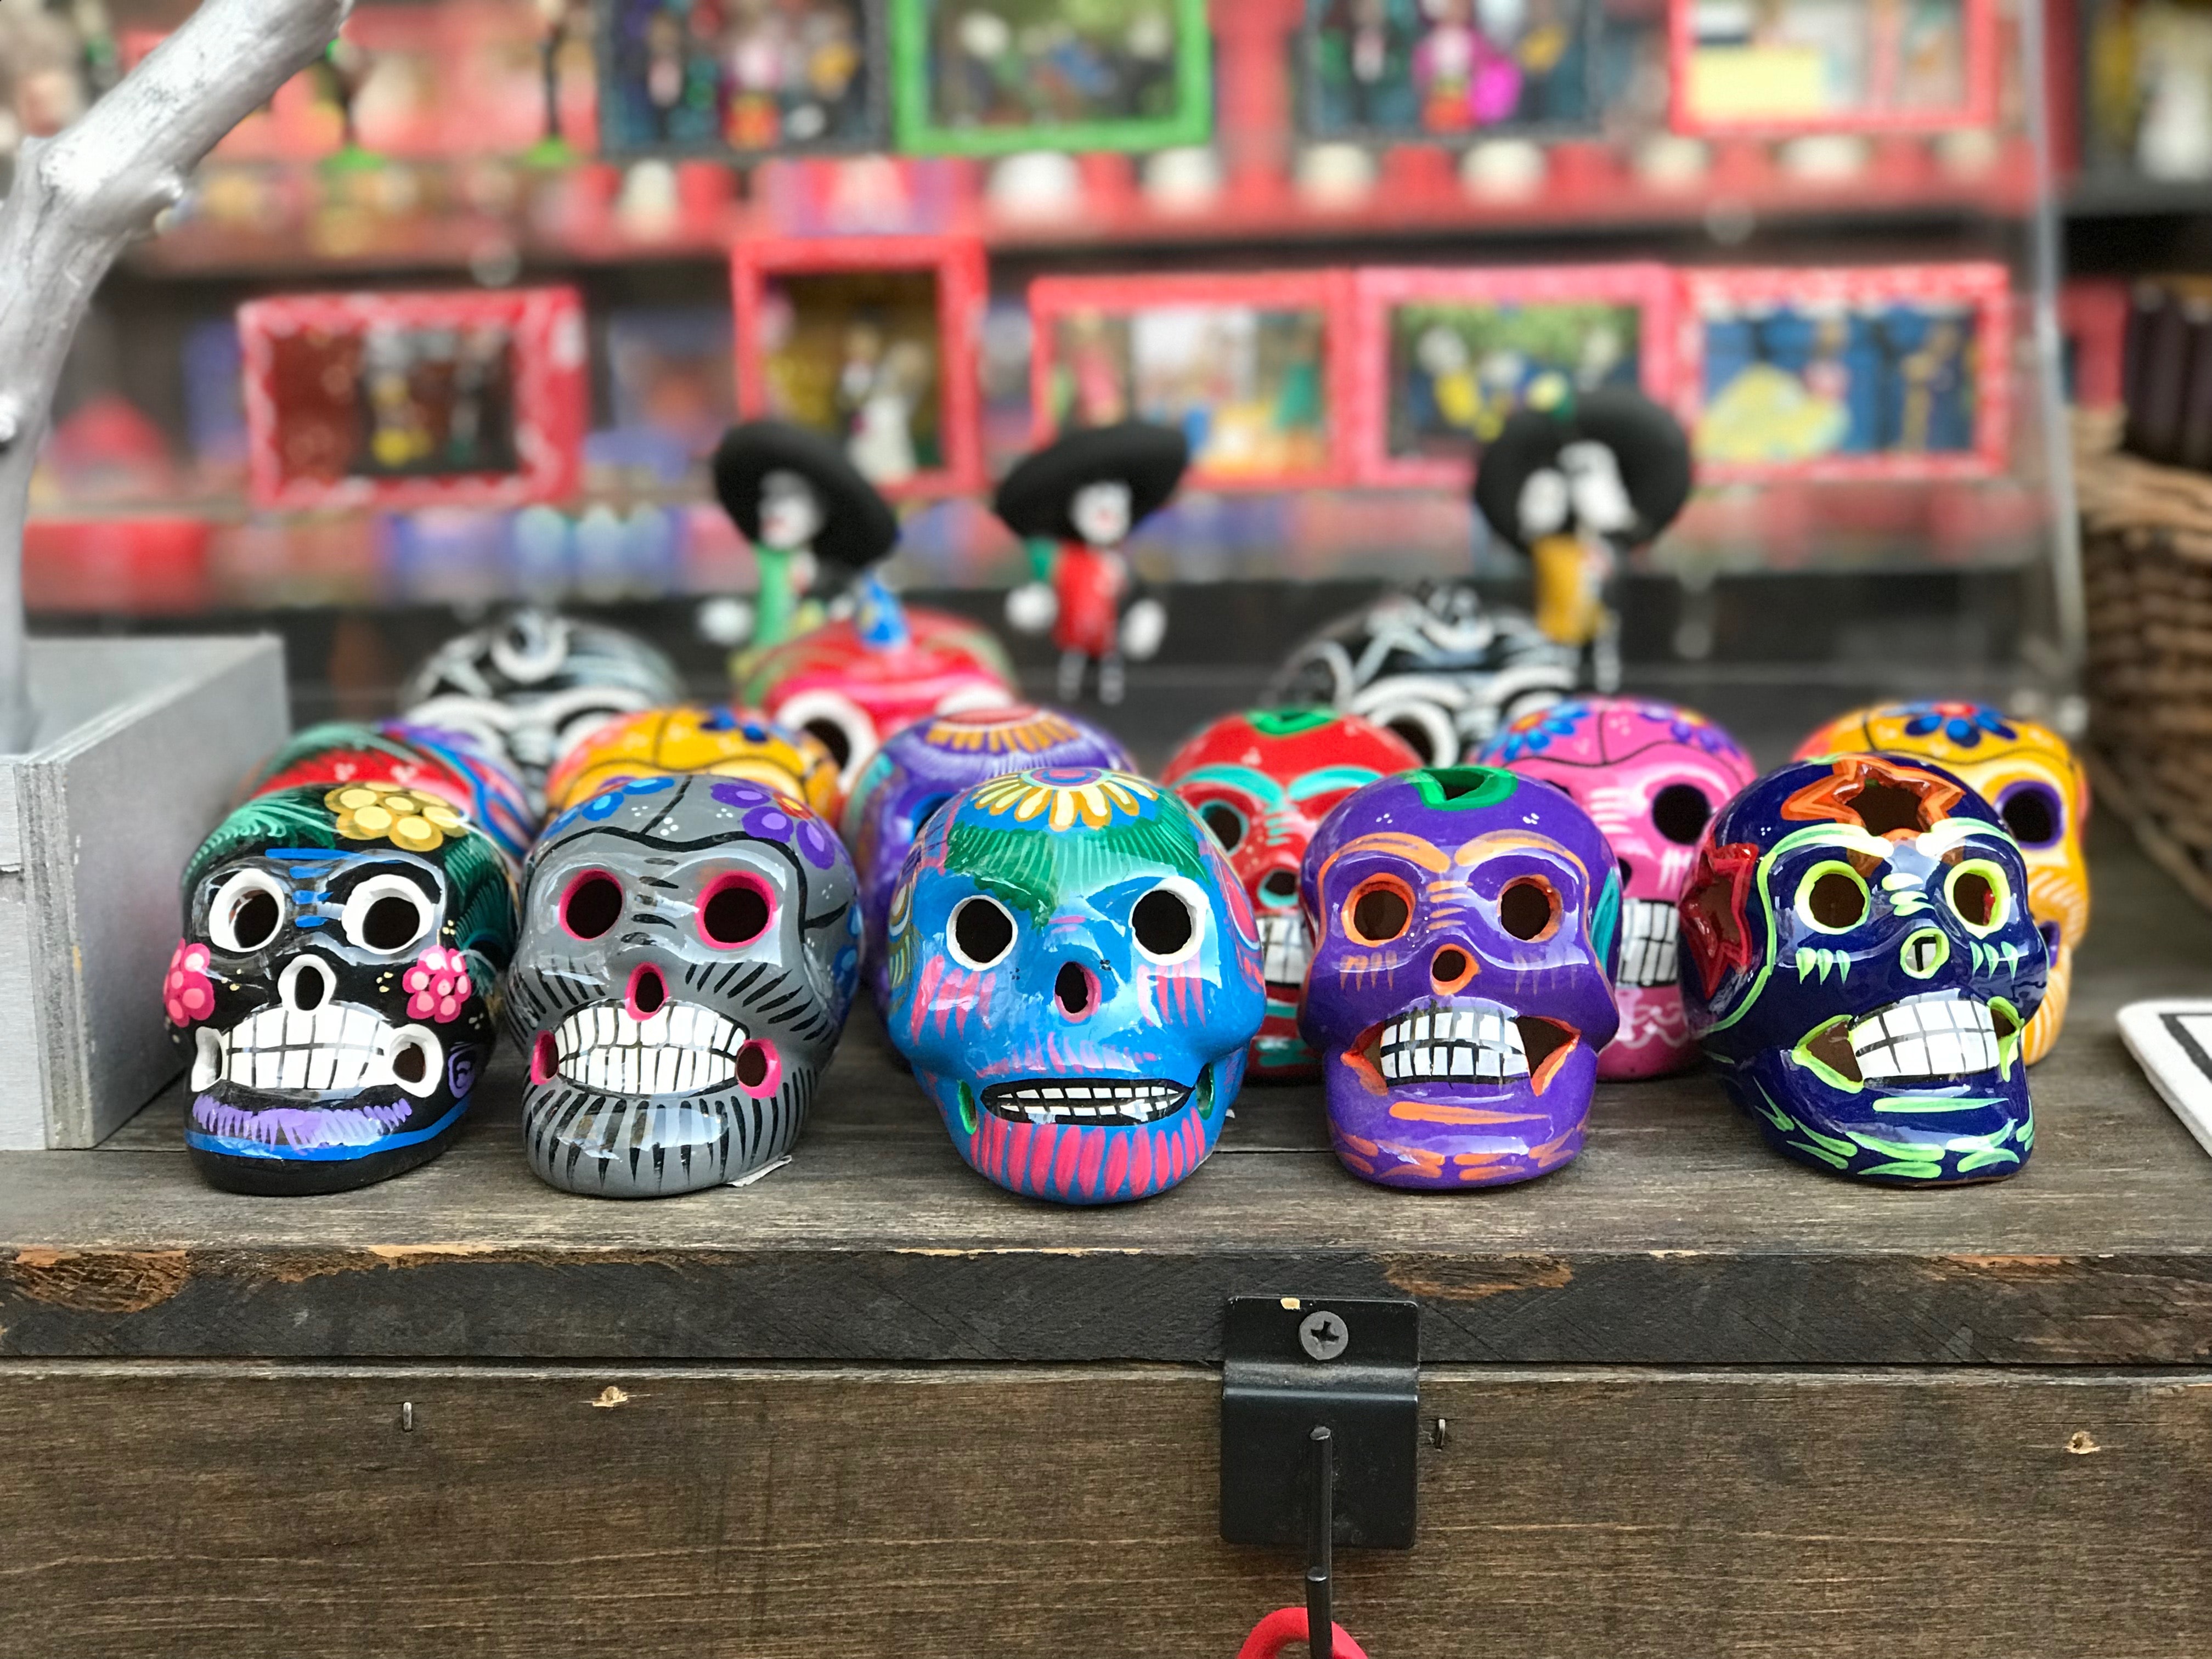 Brightly colored miniature skull figurines sit atop a wooden box.